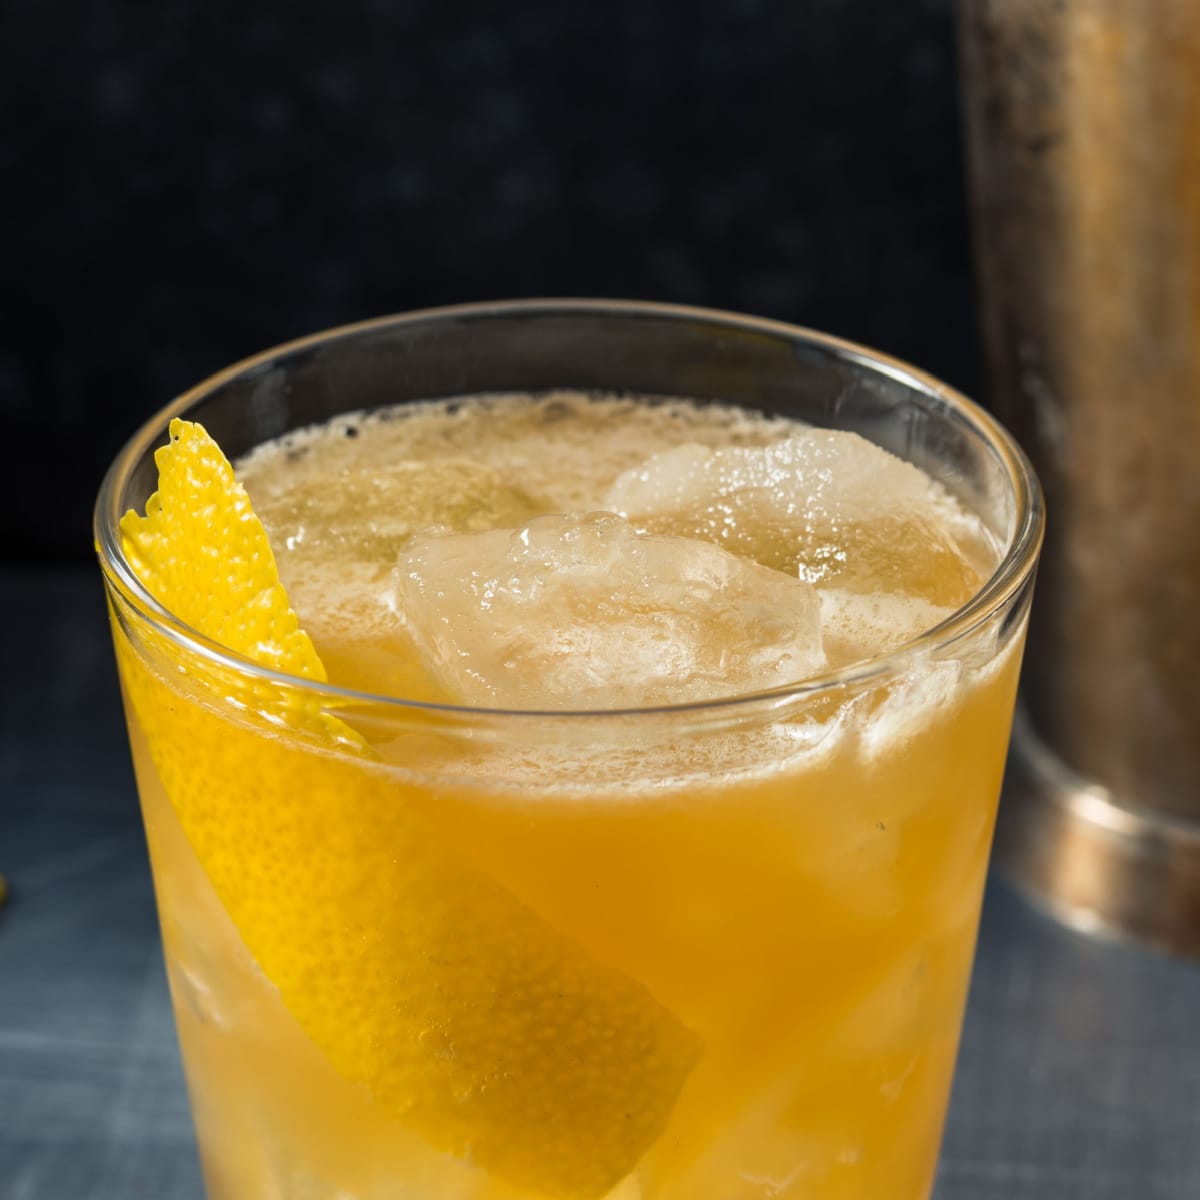 Ice cold gold rush cocktail on a glass garnished with lemon peel. 